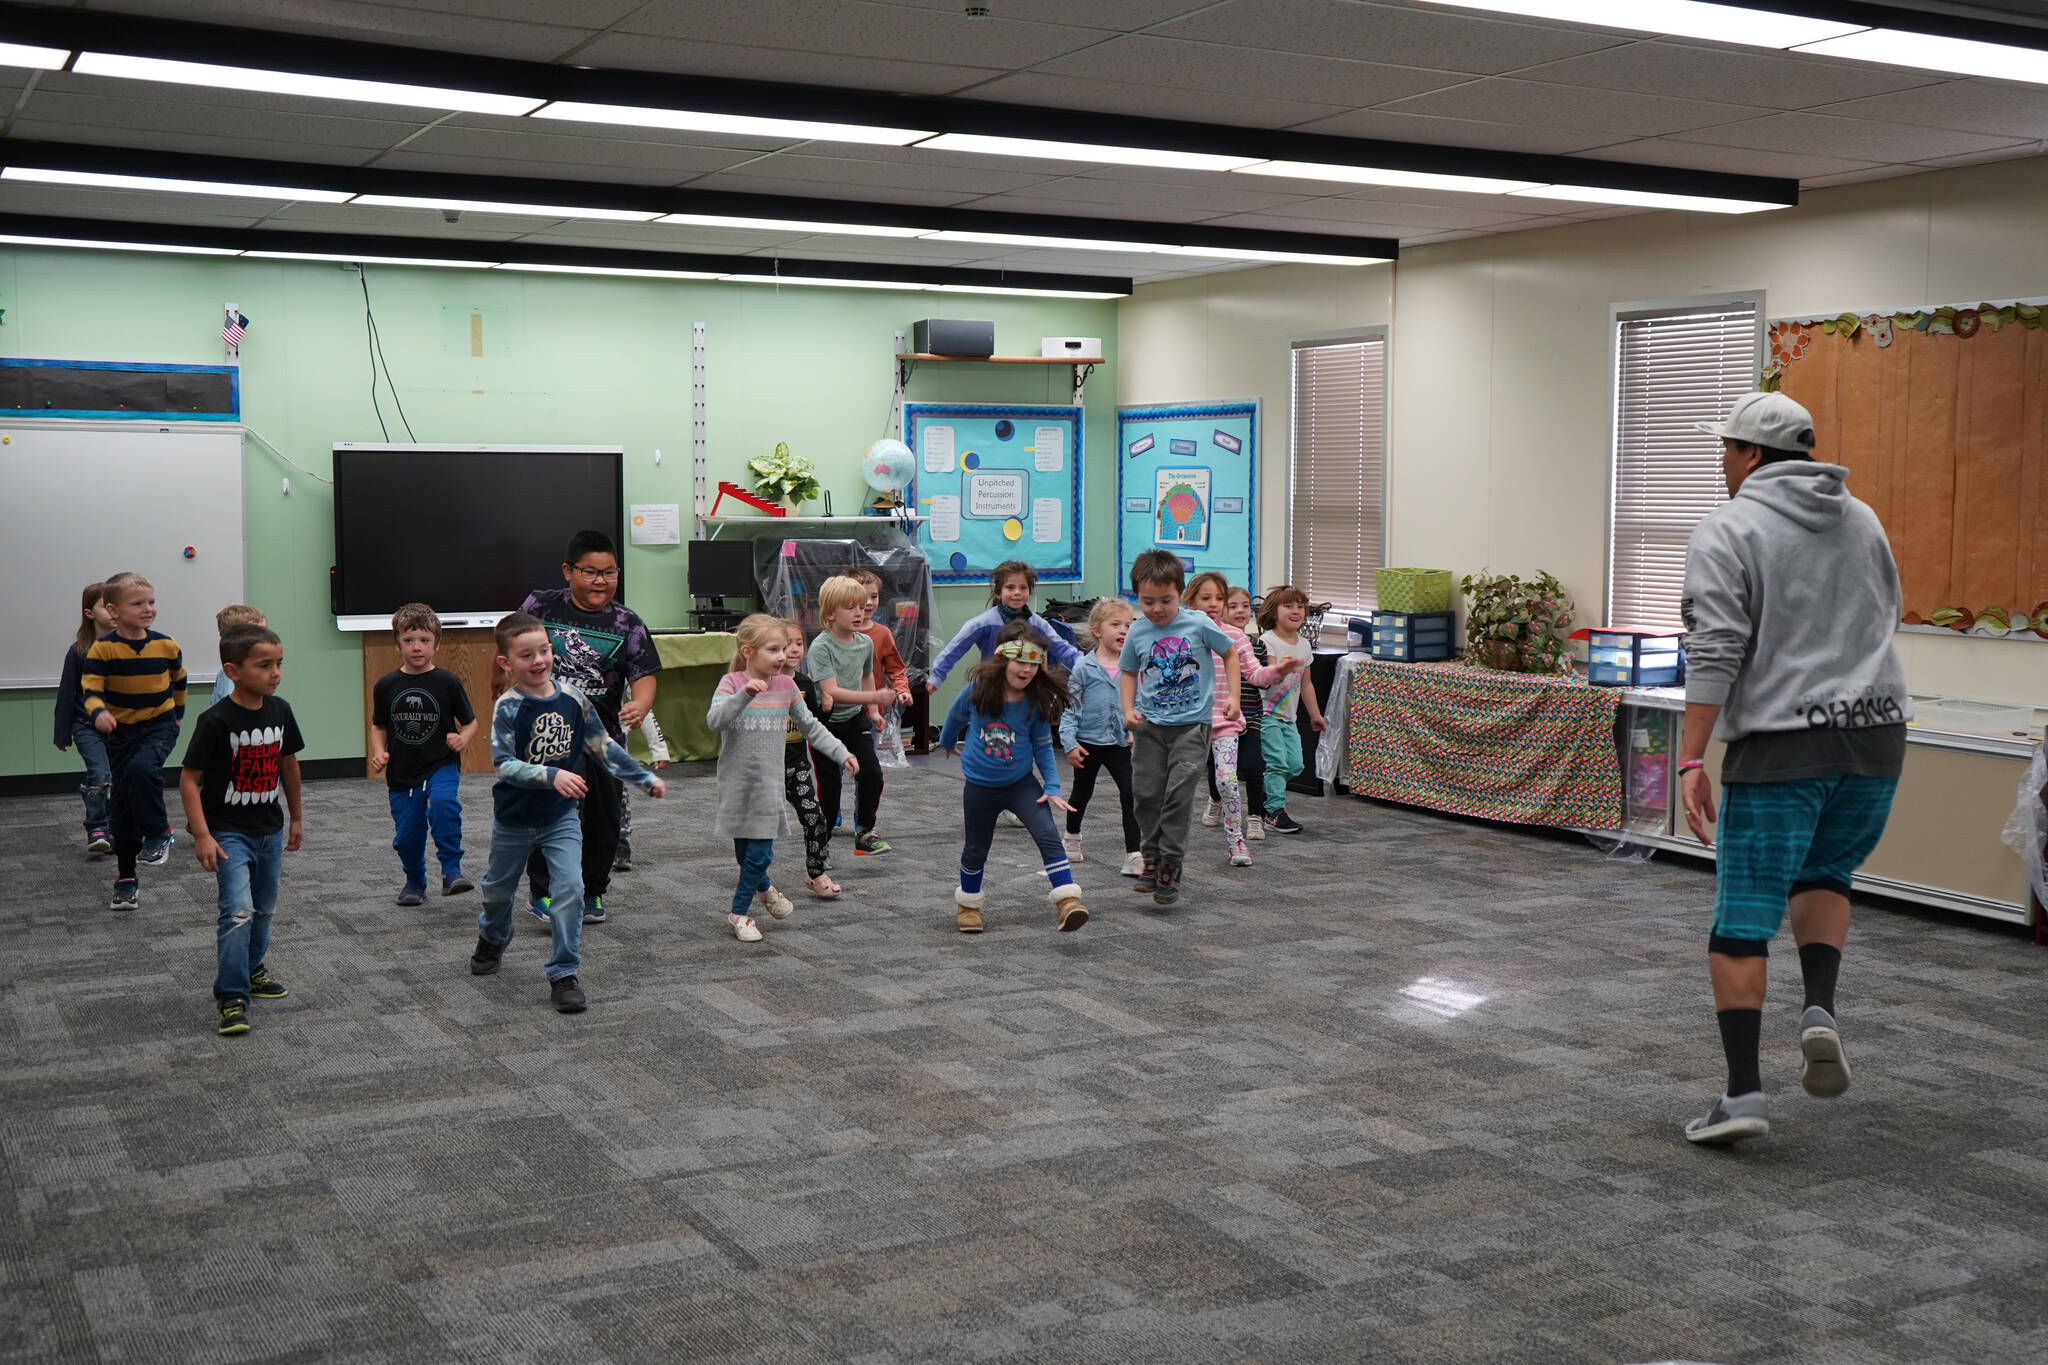 Jessie Soyangco, right, leads a class of kindergarteners in dancing to a remix of the “Little Einstein’s” theme song at Kaleidoscope School of Arts and Science in Kenai, Alaska, on Thursday, Oct. 19, 2023. (Jake Dye/Peninsula Clarion)